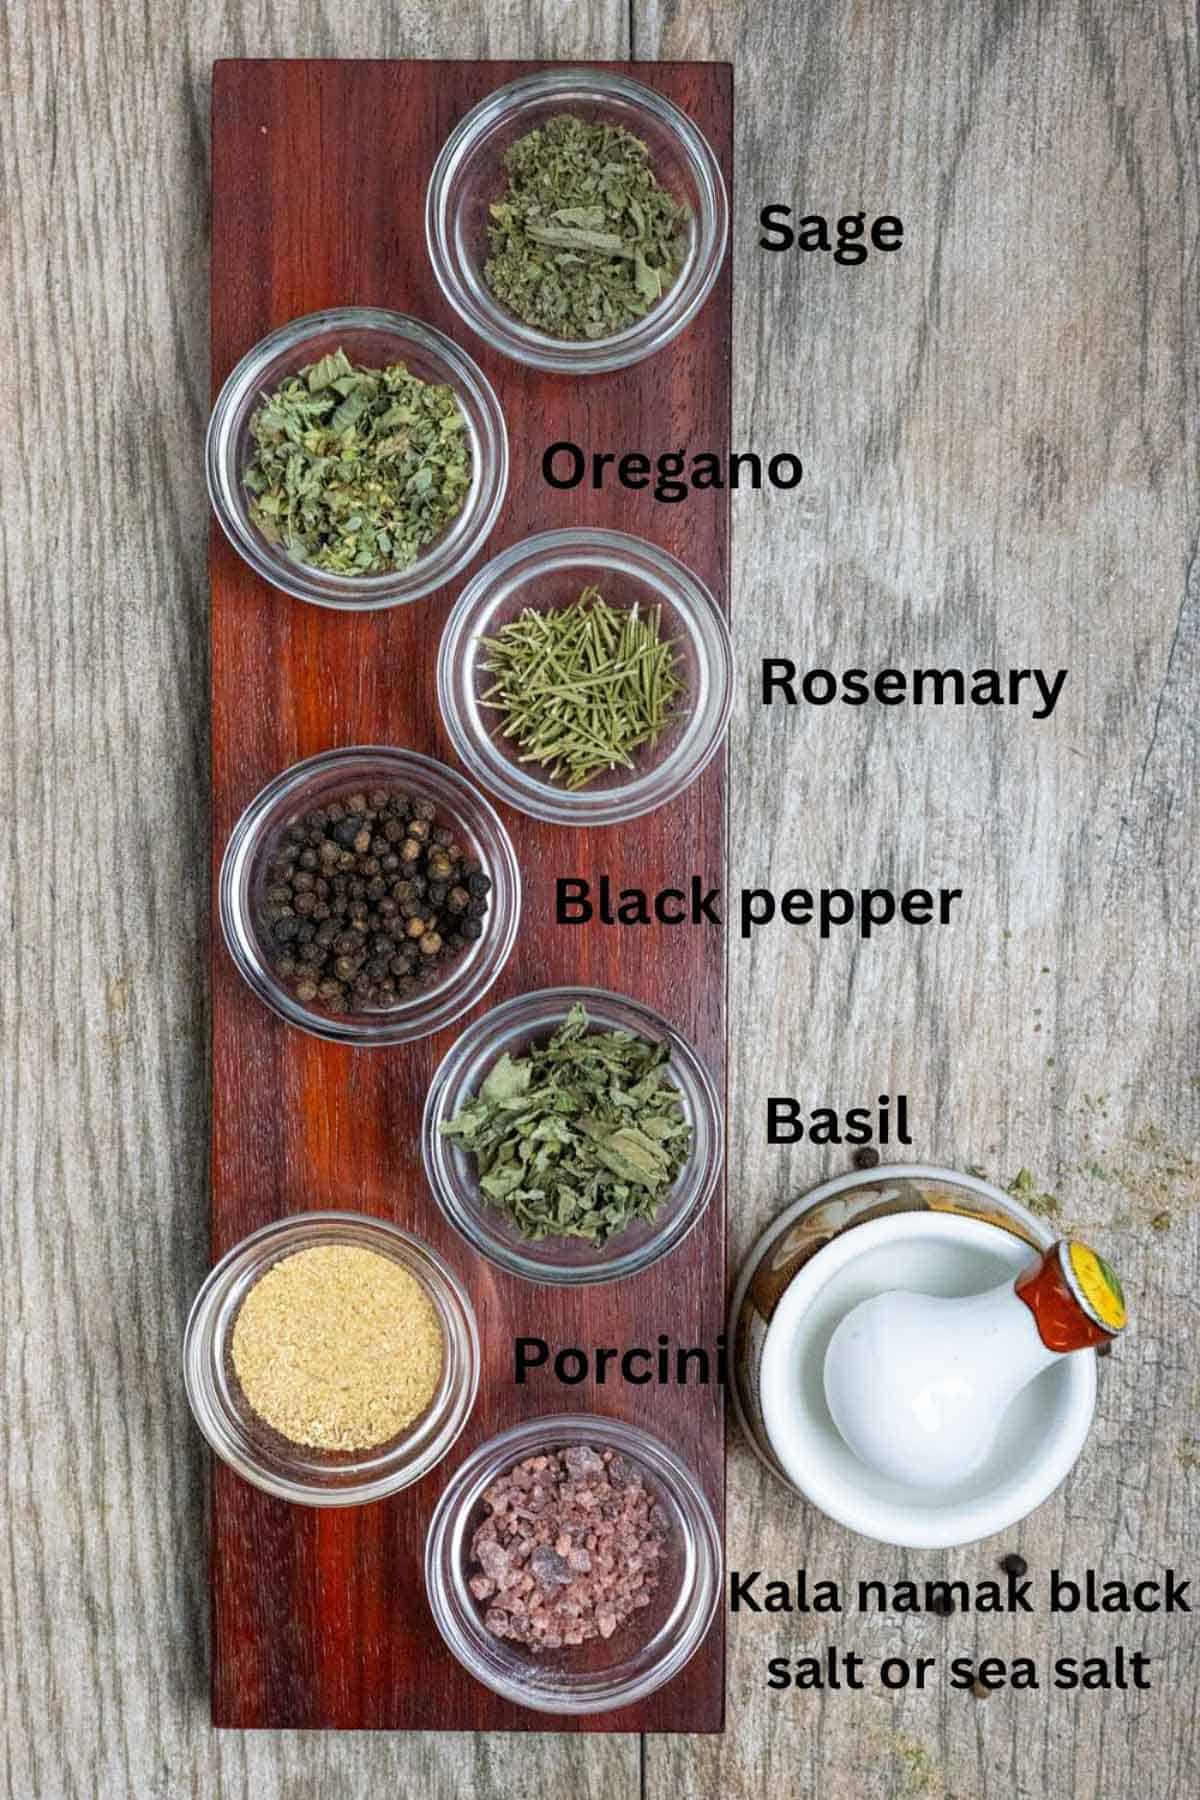 Ingredients for seasoning in small glass bowls in a vertical row with black text labels.